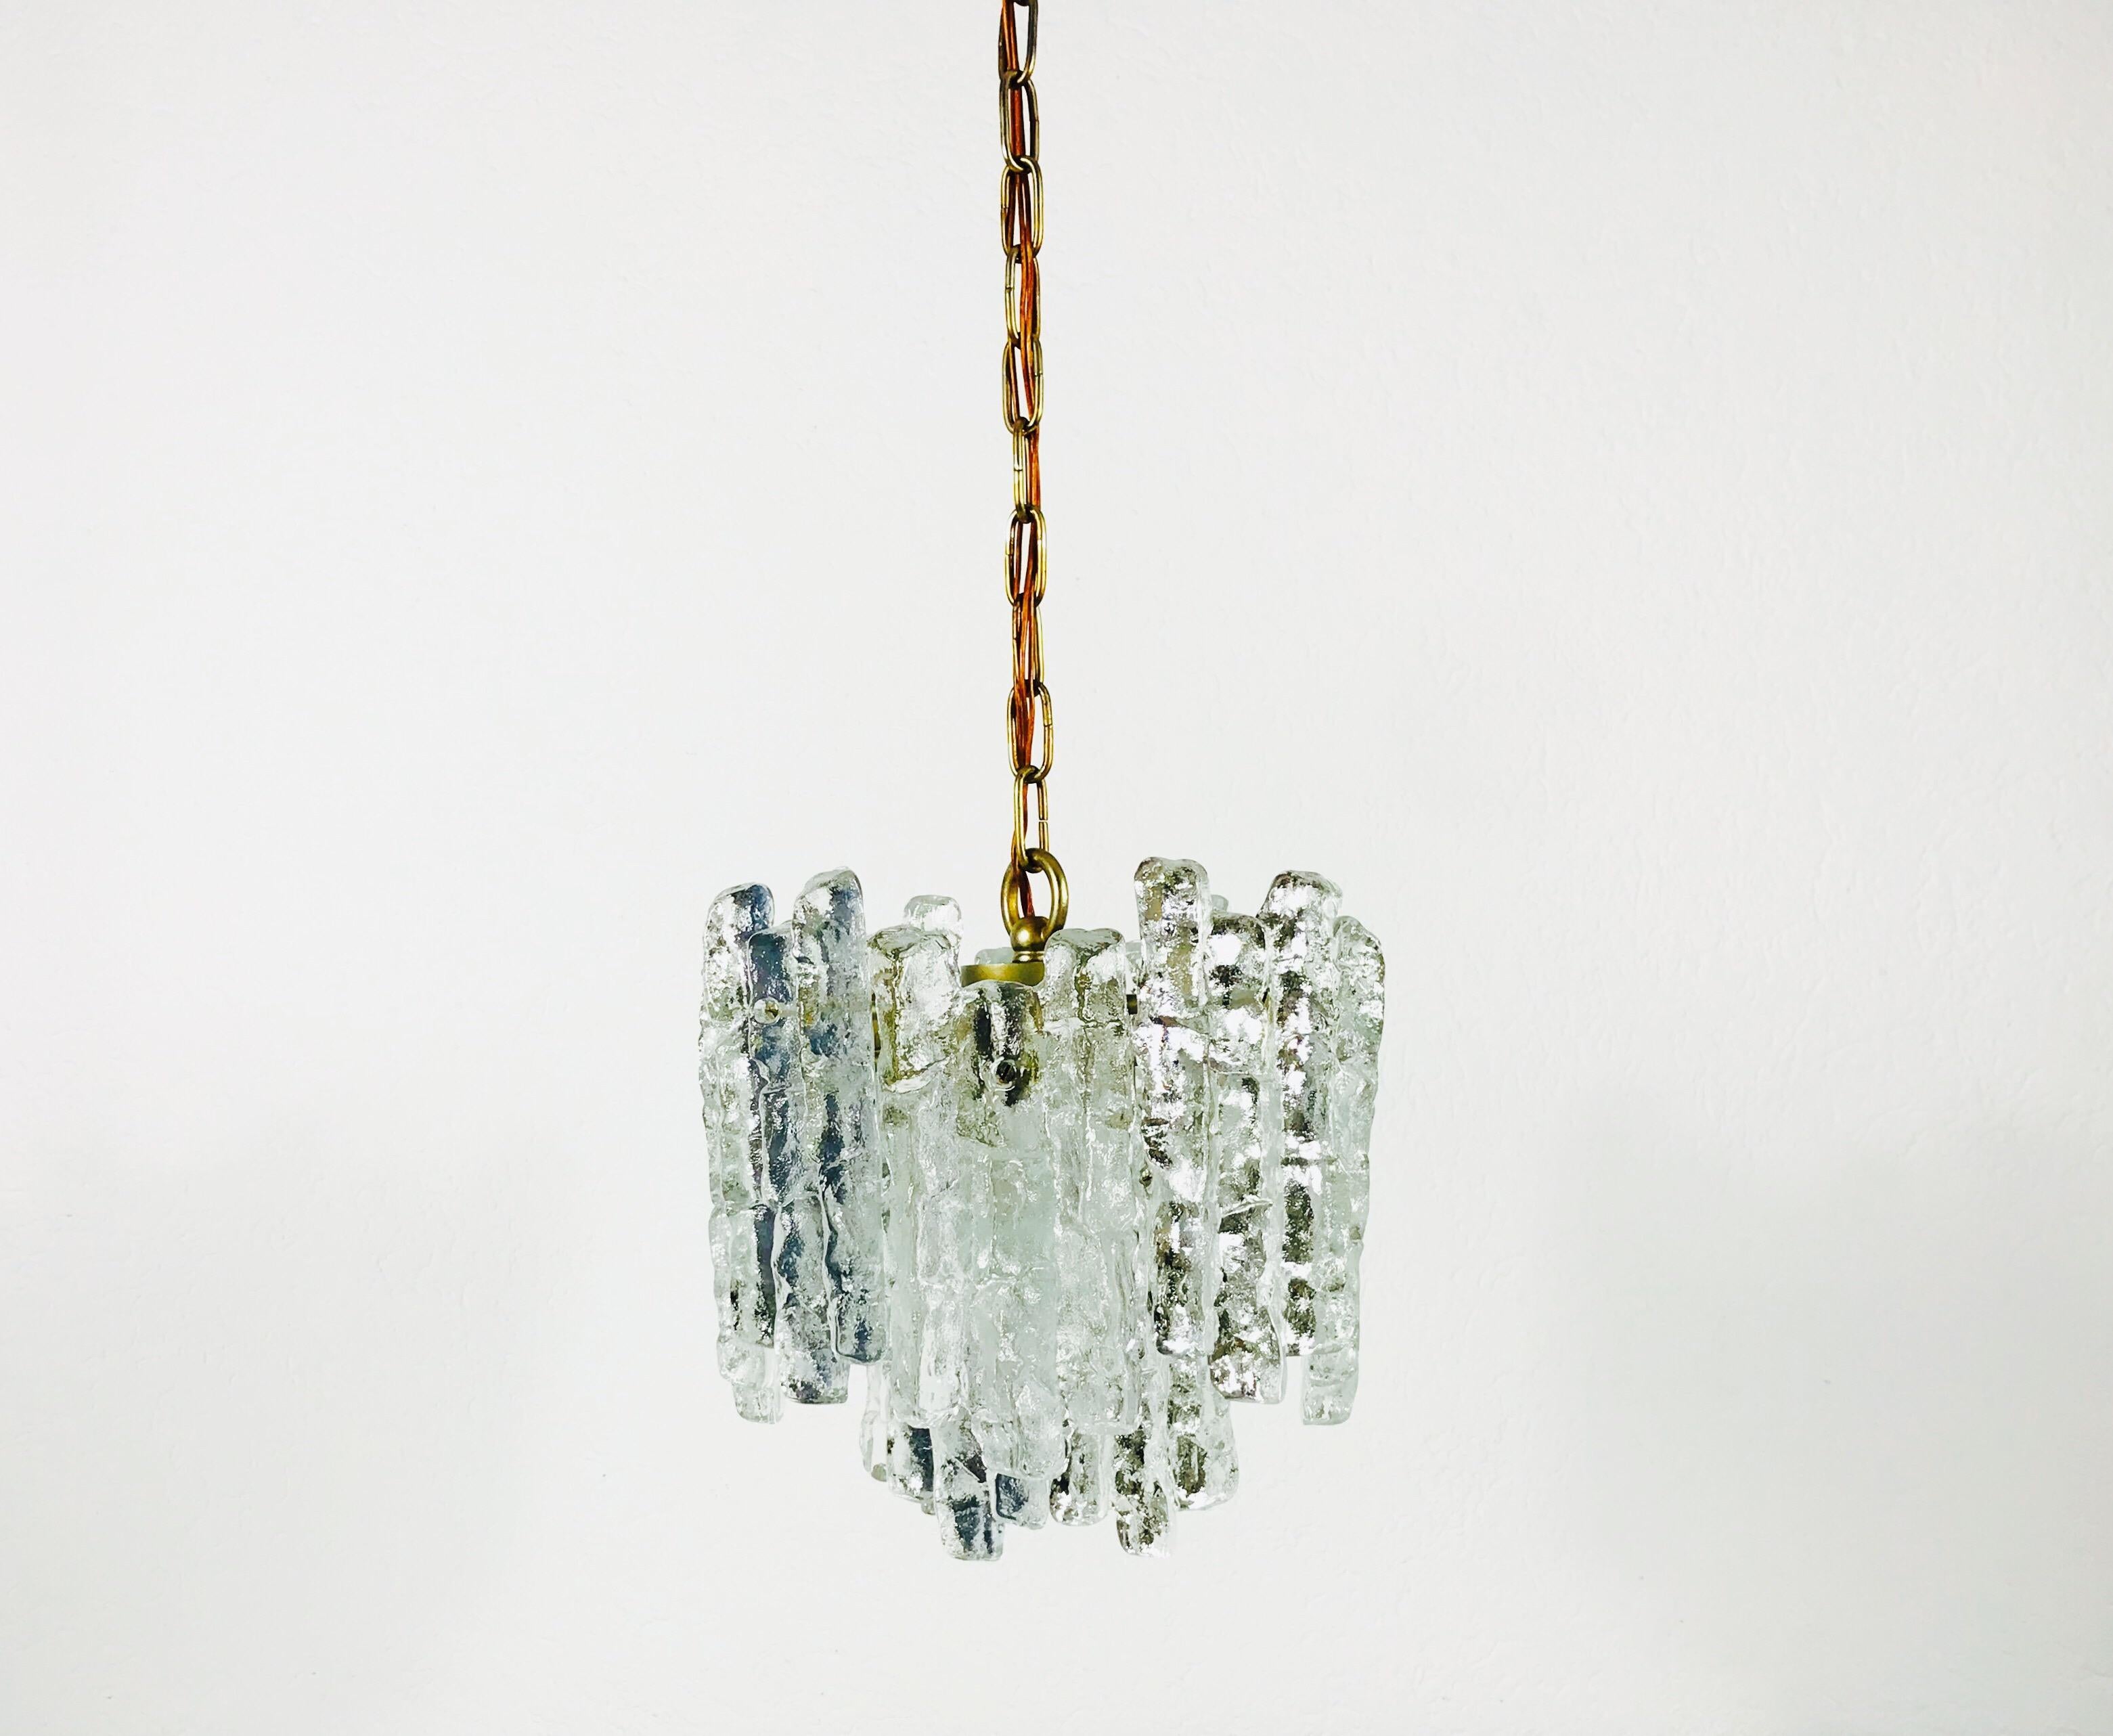 Midcentury Ice Crystal Glass Pendant Light or Chandelier by Kalmar, circa 1960s For Sale 1